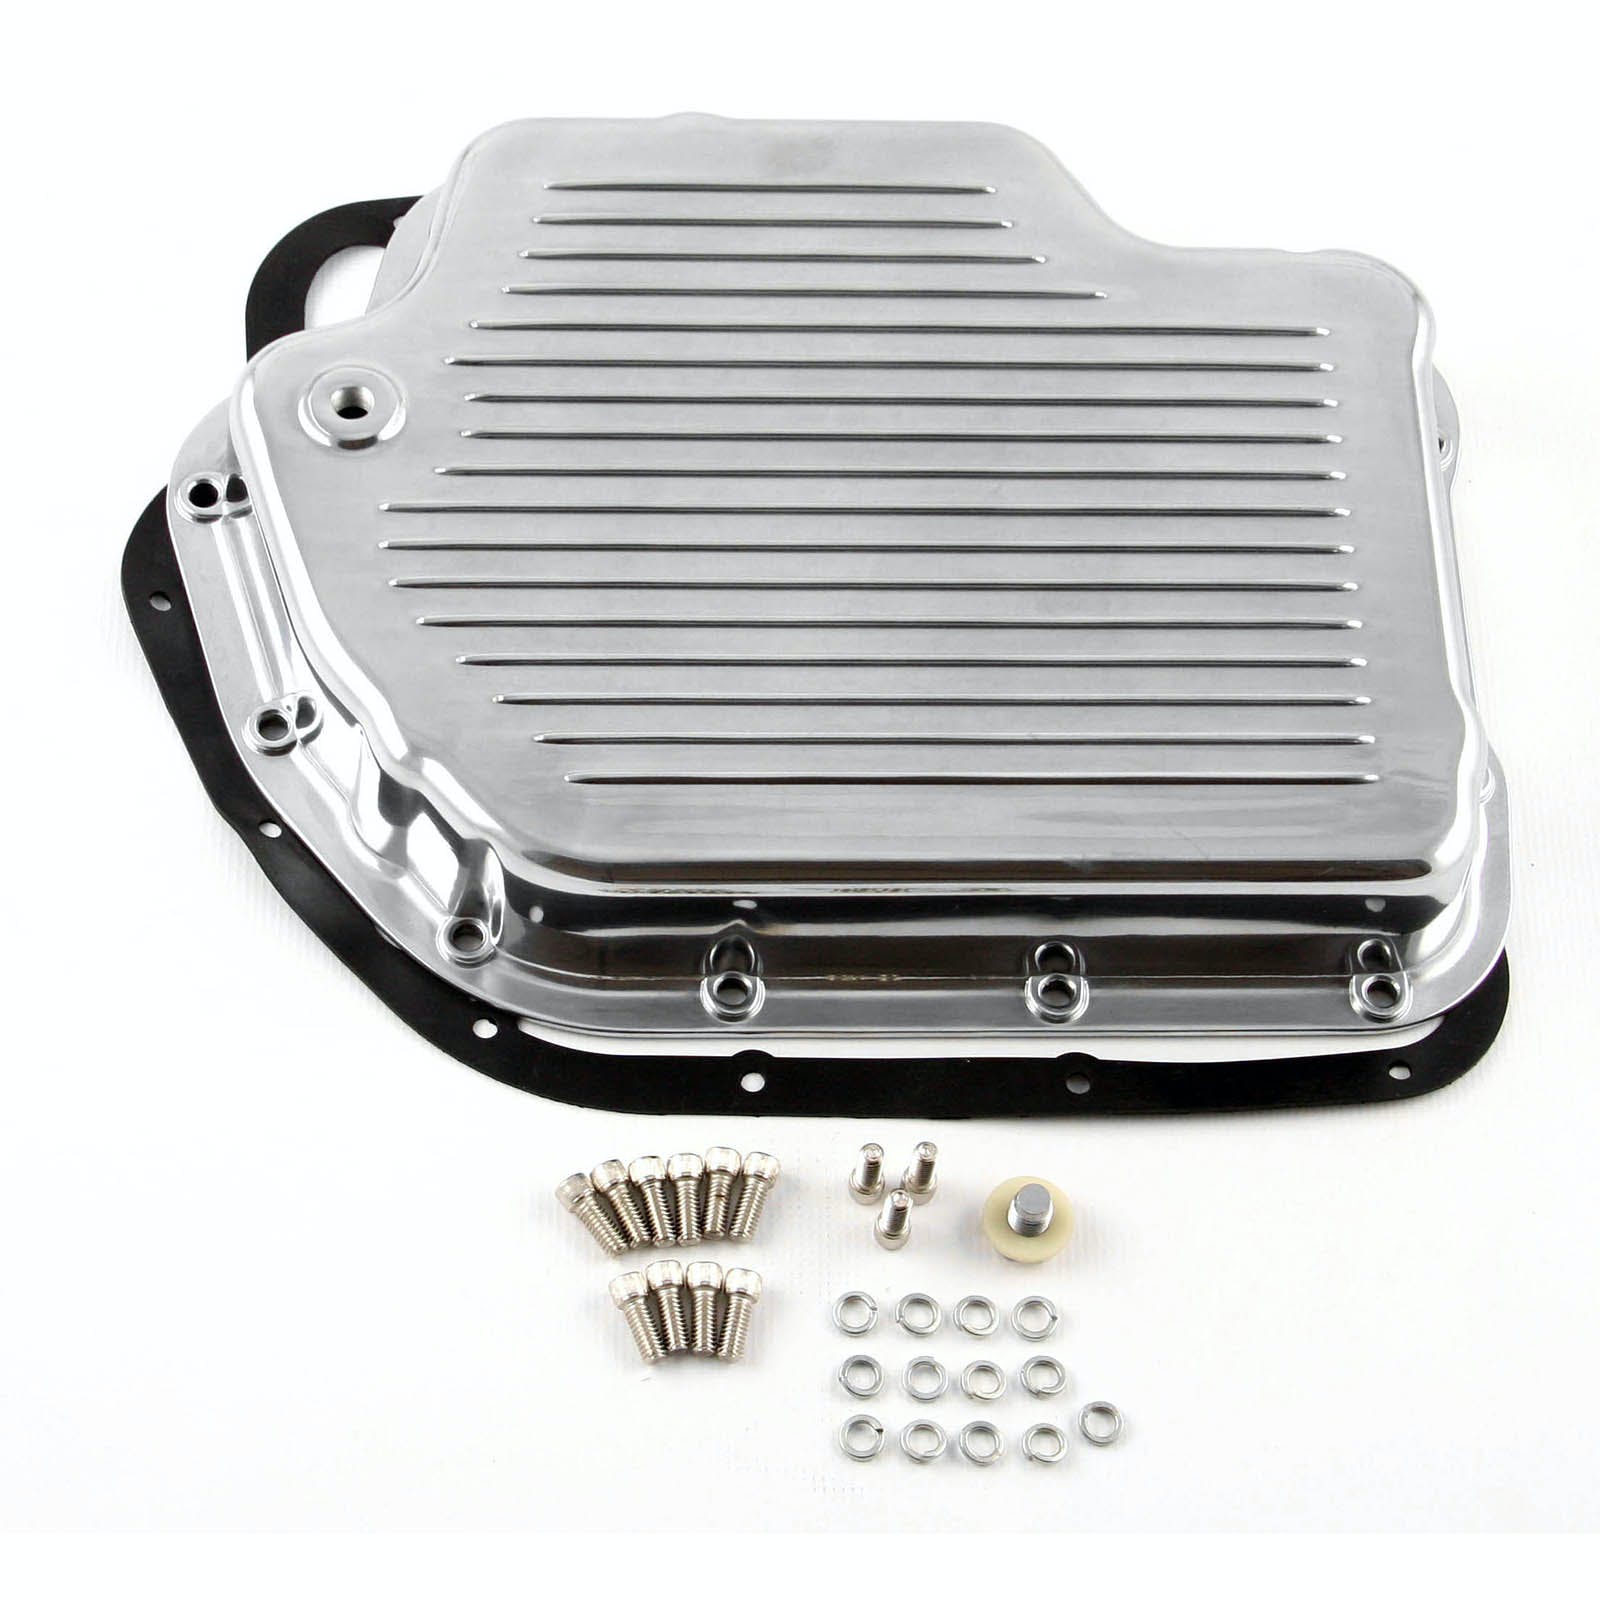 Speedmaster PCE221.1005 Turbo TH400 Finned Aluminum Transmission Oil Pan Set Polised (w/Bolts and Gasket)